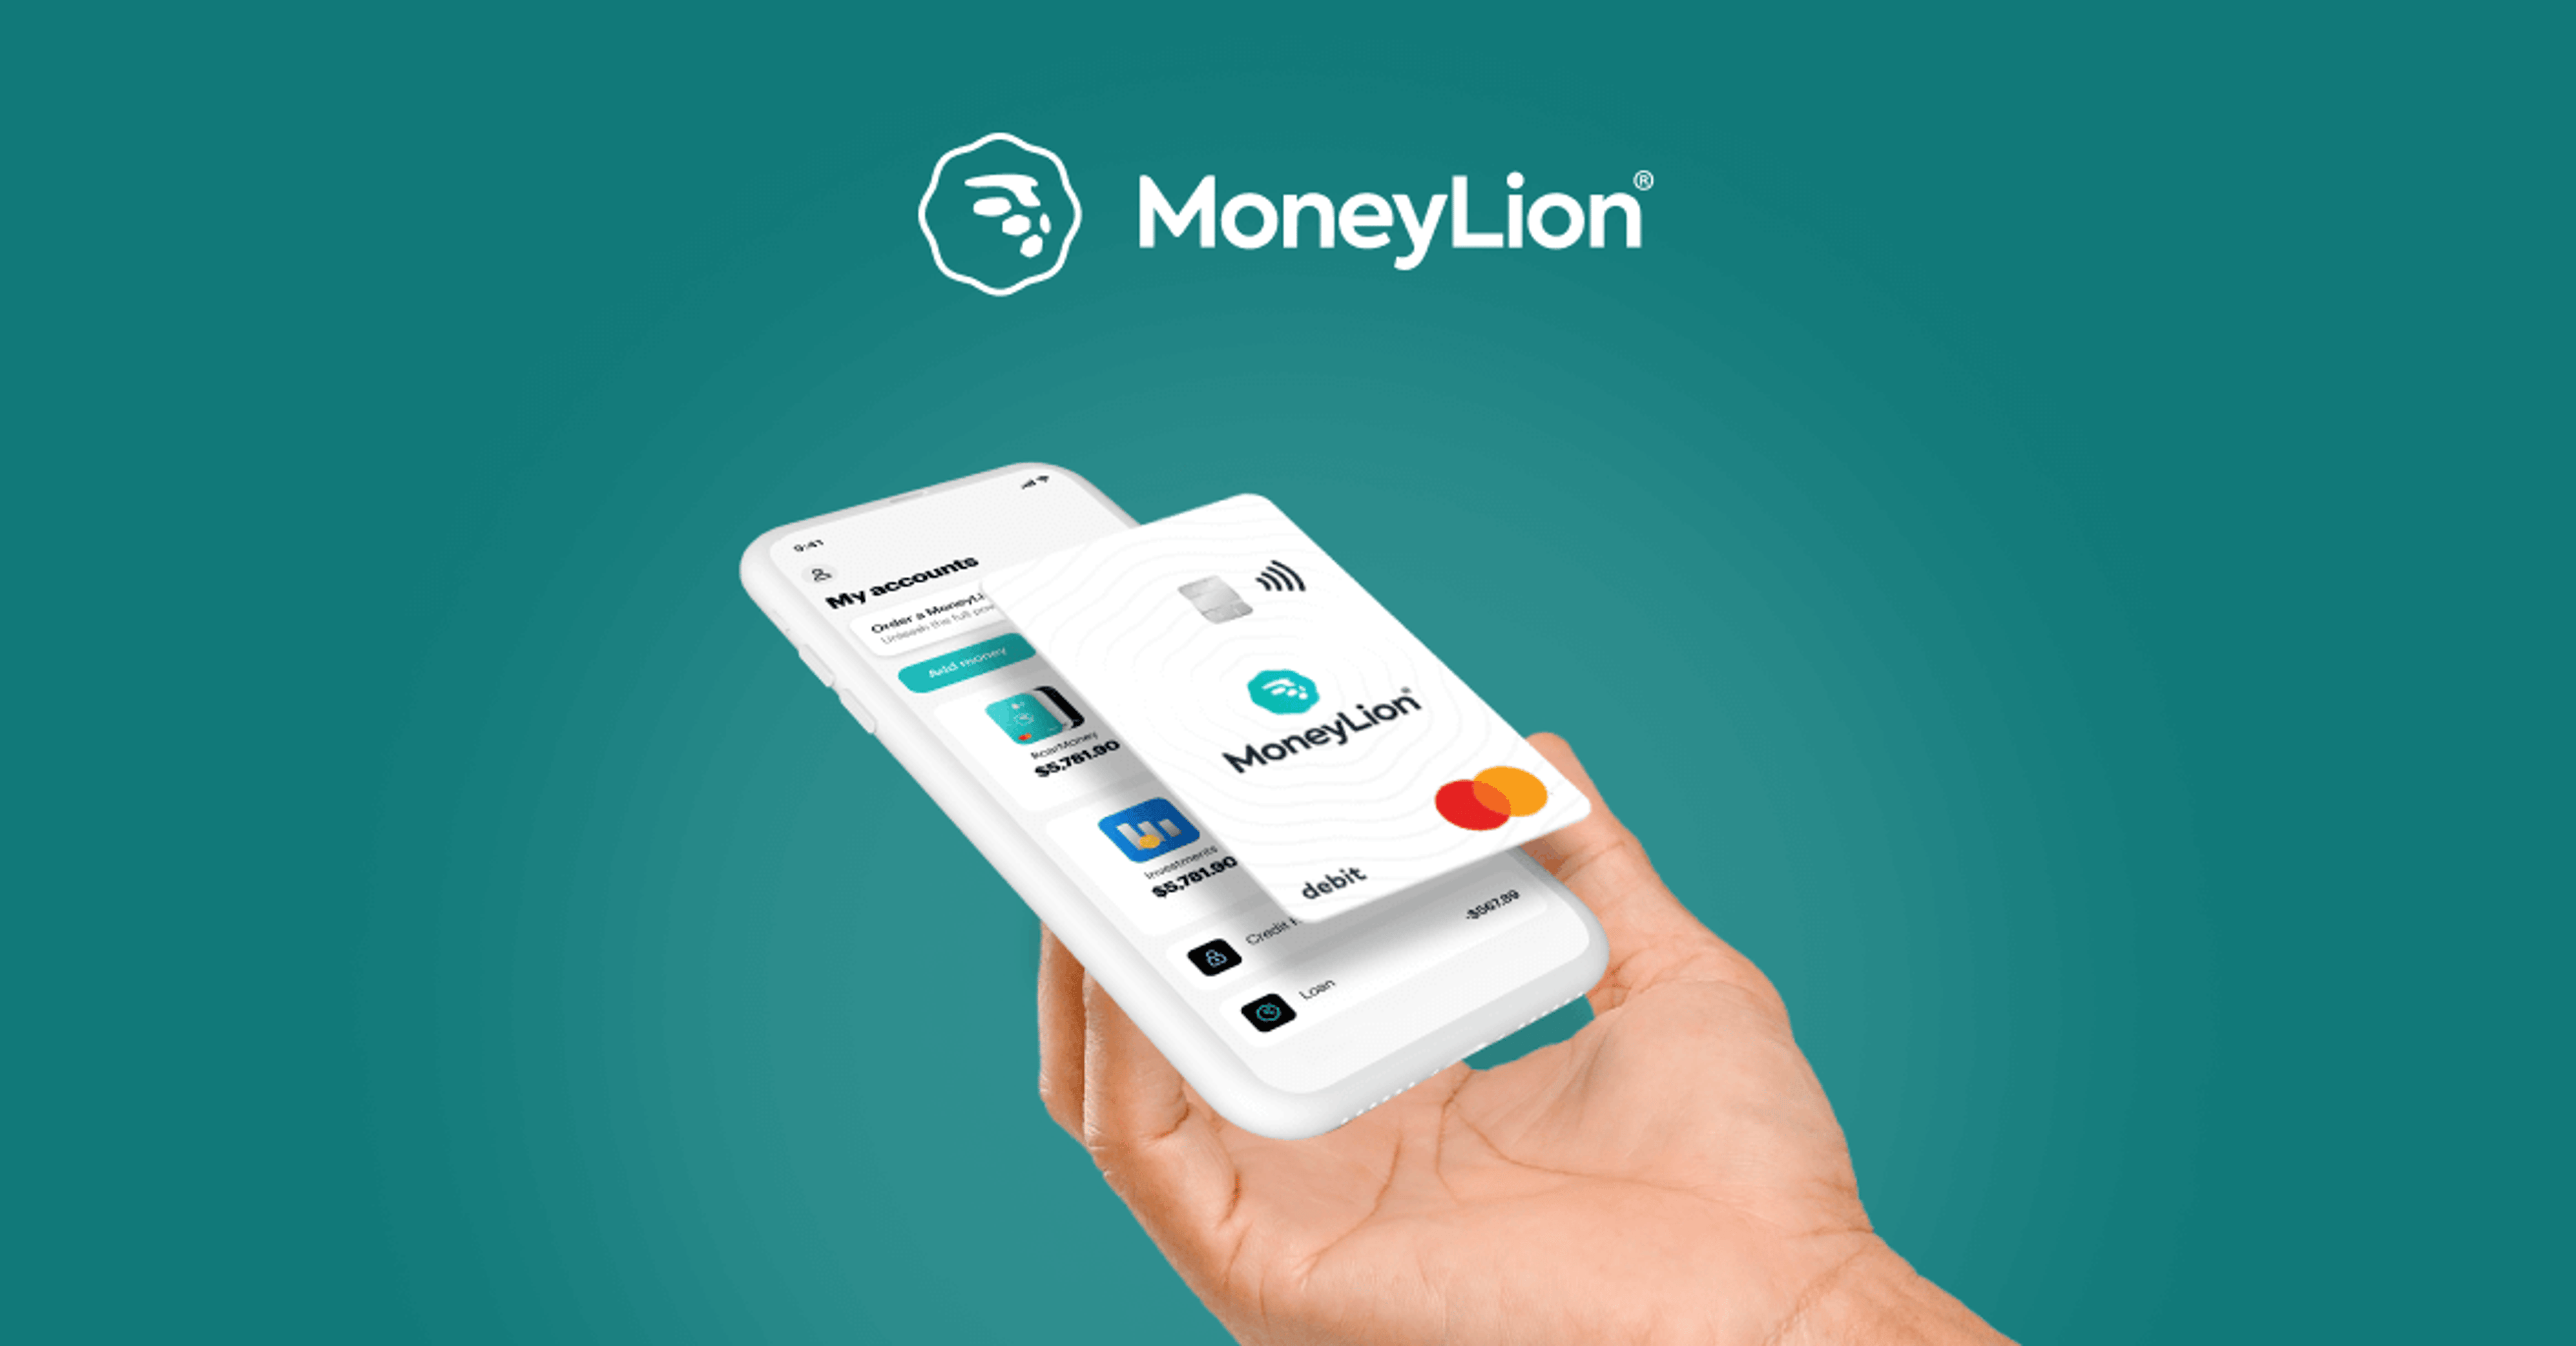 MoneyLion Strengthens Ability To Find, Access Financial Products With $440M Even Financial Acquisition